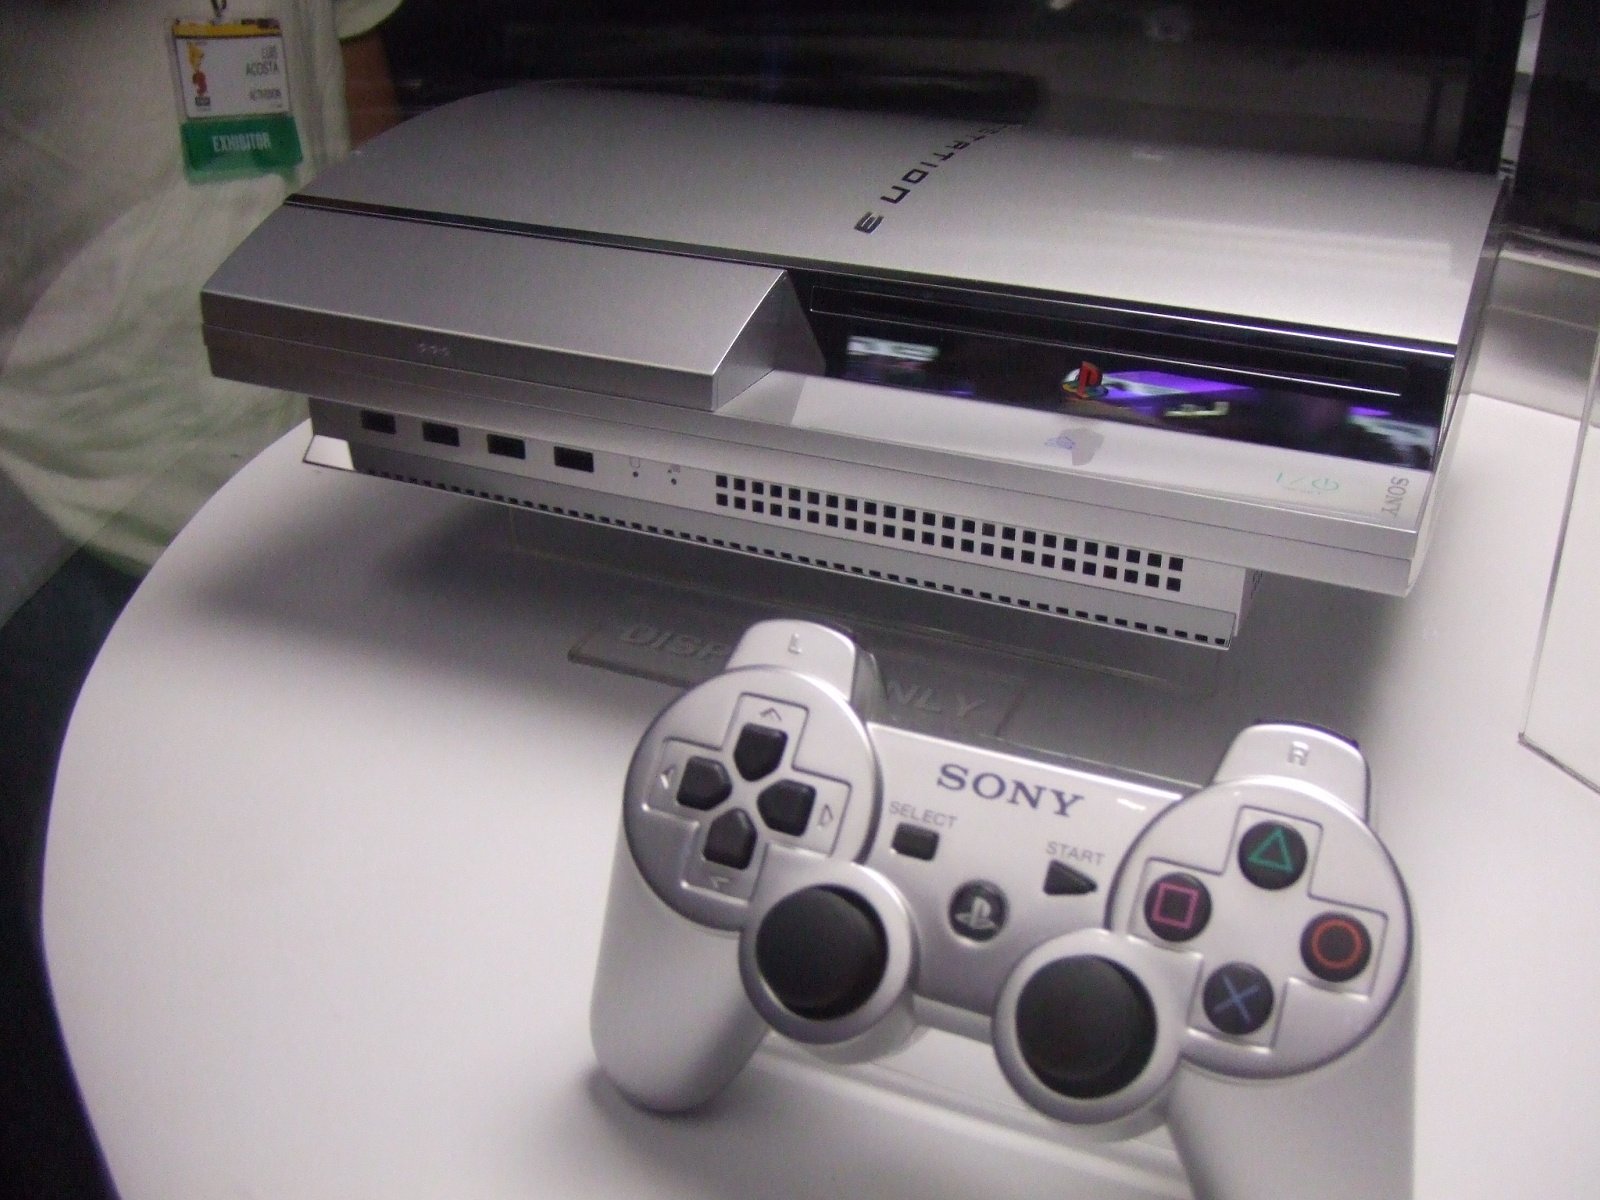 PS3 and controller at E3 2006